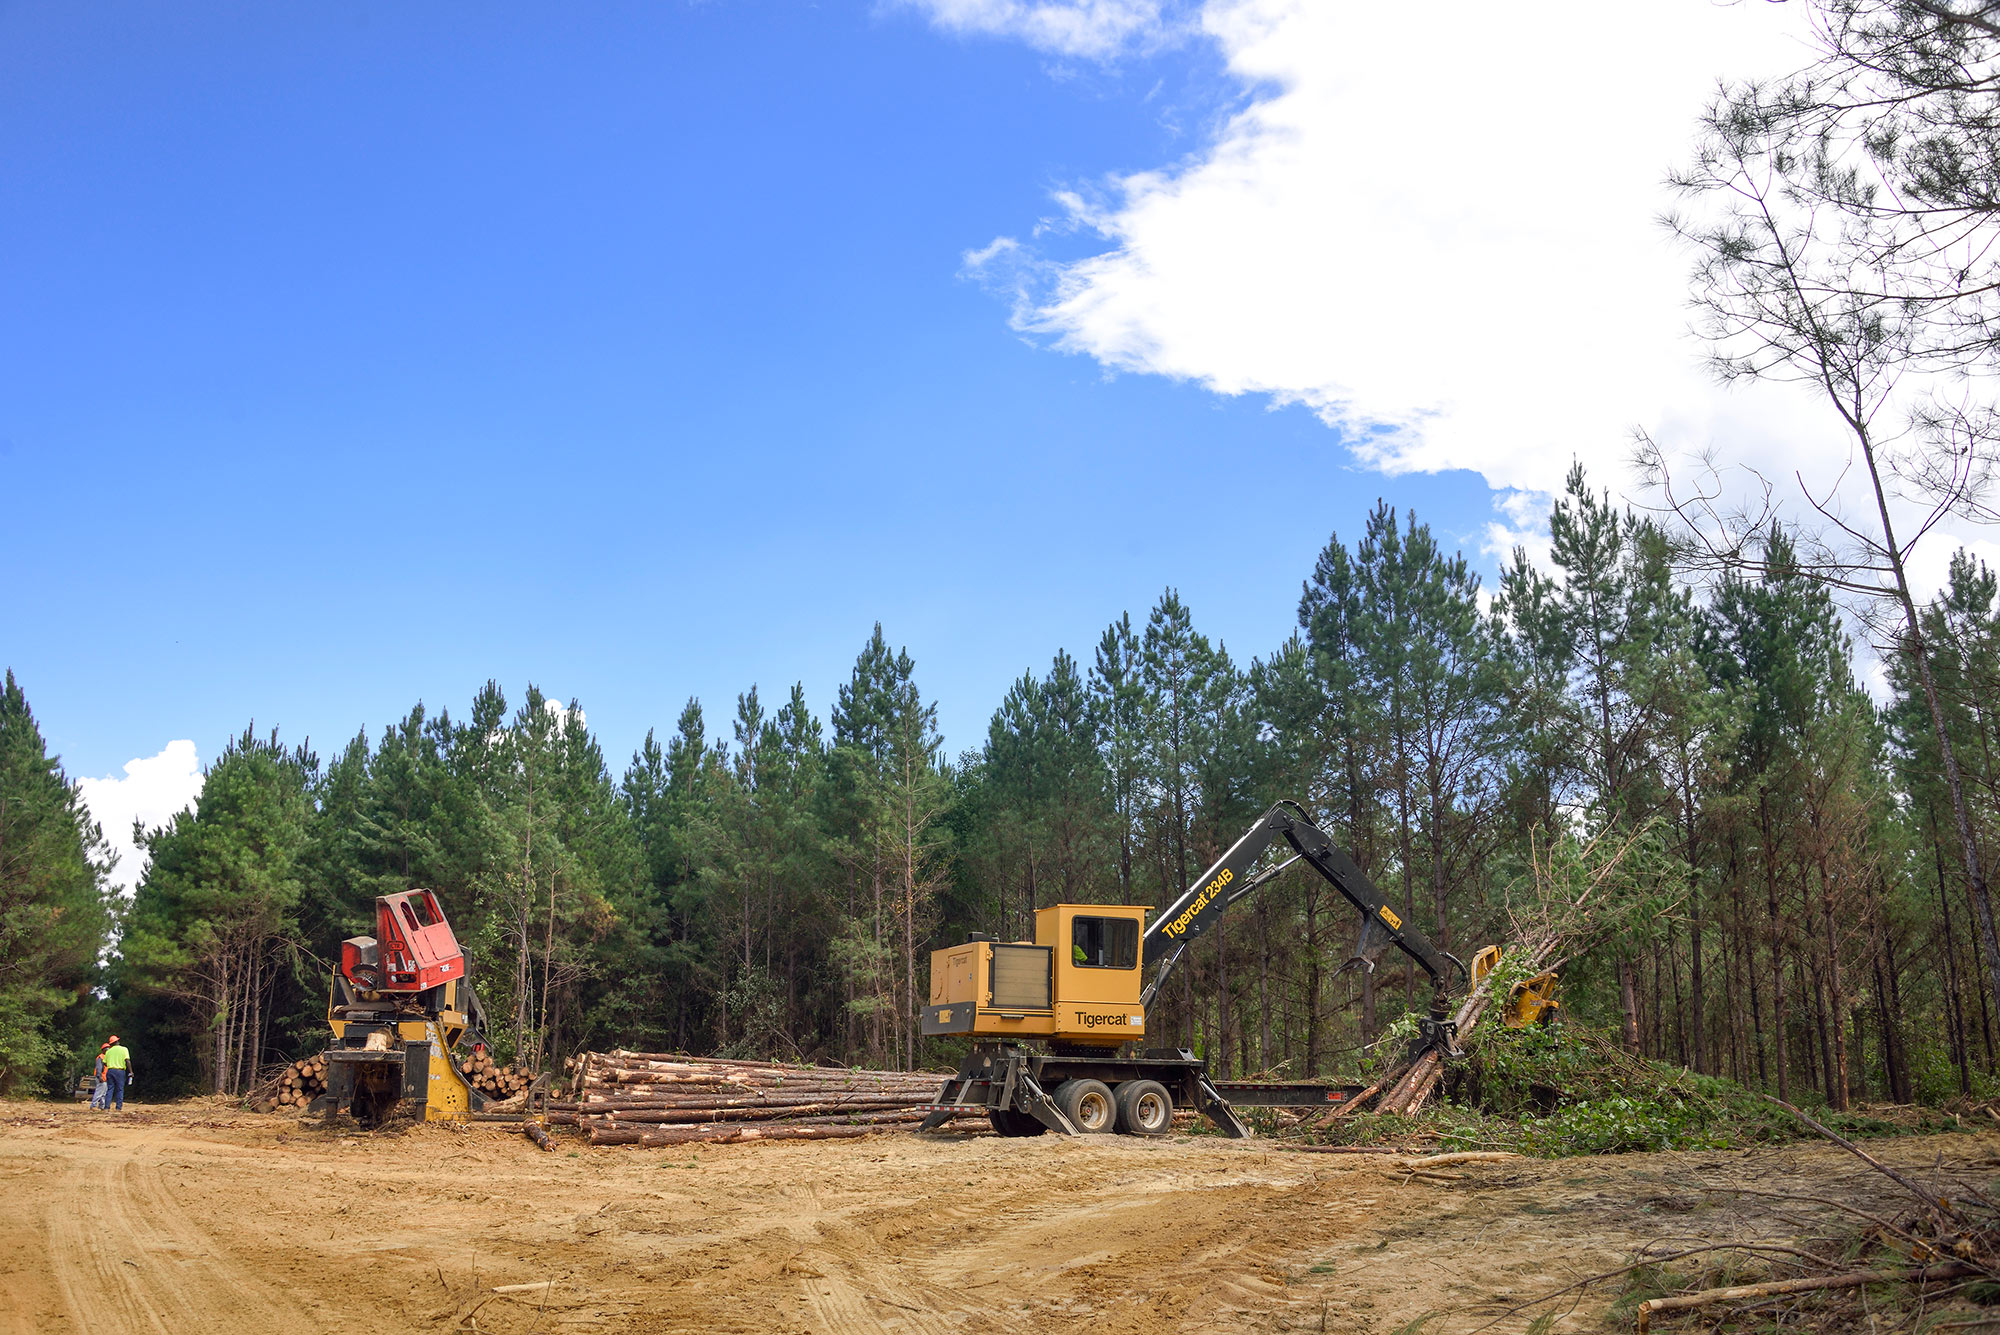 Two yellow logging machines stand in a dirt-covered patch of land. A machine on the right moves the trees, while the machine on the left sits still, waiting to be used.